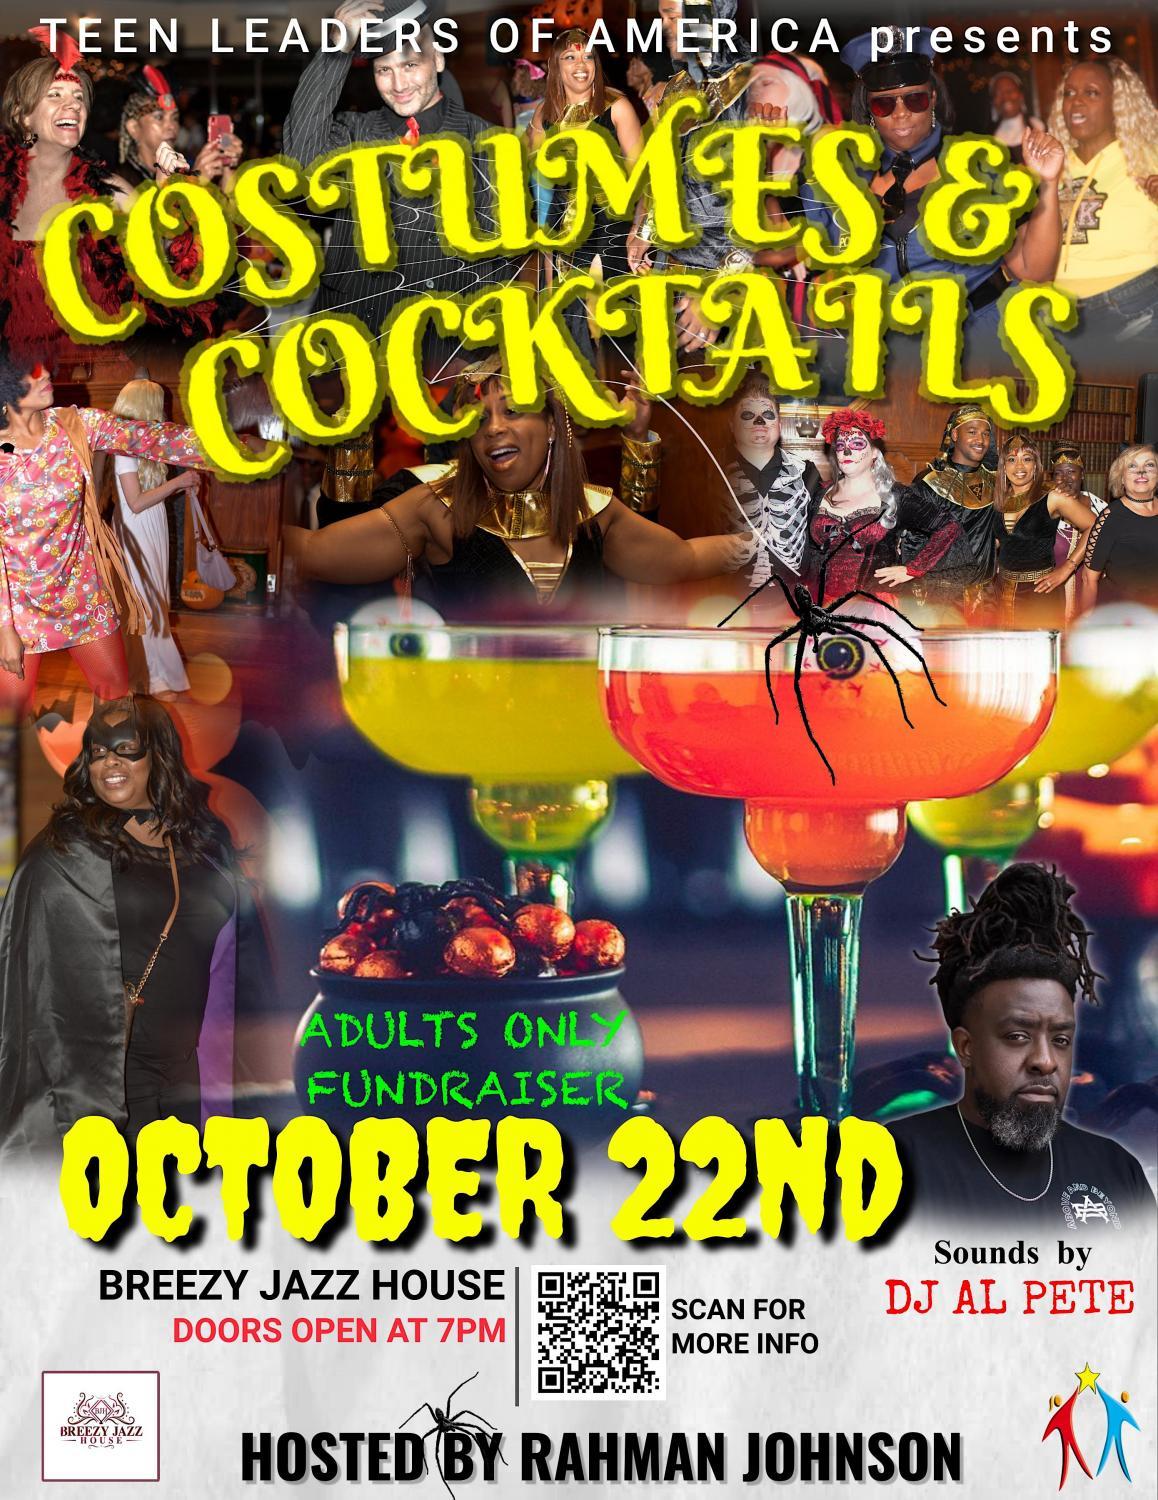 Costumes and Cocktails at Breezy Jazz House & Restaurant
Sat Oct 22, 7:00 PM - Sat Oct 22, 7:00 PM
in 2 days